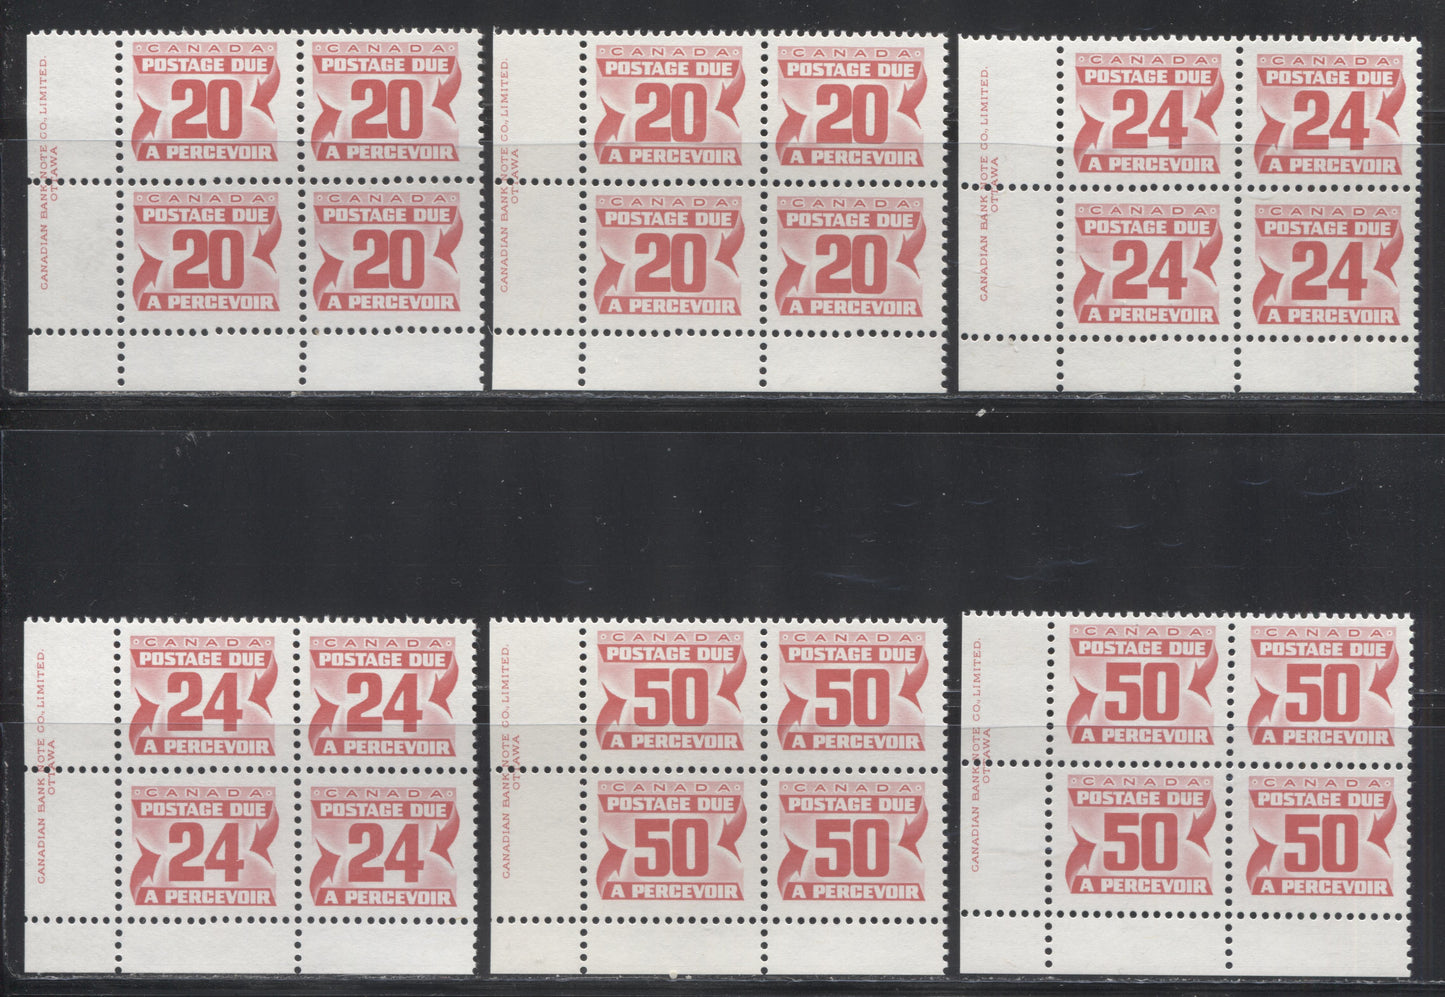 Lot 171 Canada #J38-40 20c, 24c & 50c Carmine Rose 1977-1982, 4th Centennial Postage Due Issue, 6 F/VFNH LL Inscription Blocks Of 4 On Various DF & LF-fl Papers With PVA Gums, Perf 12.5 x 12